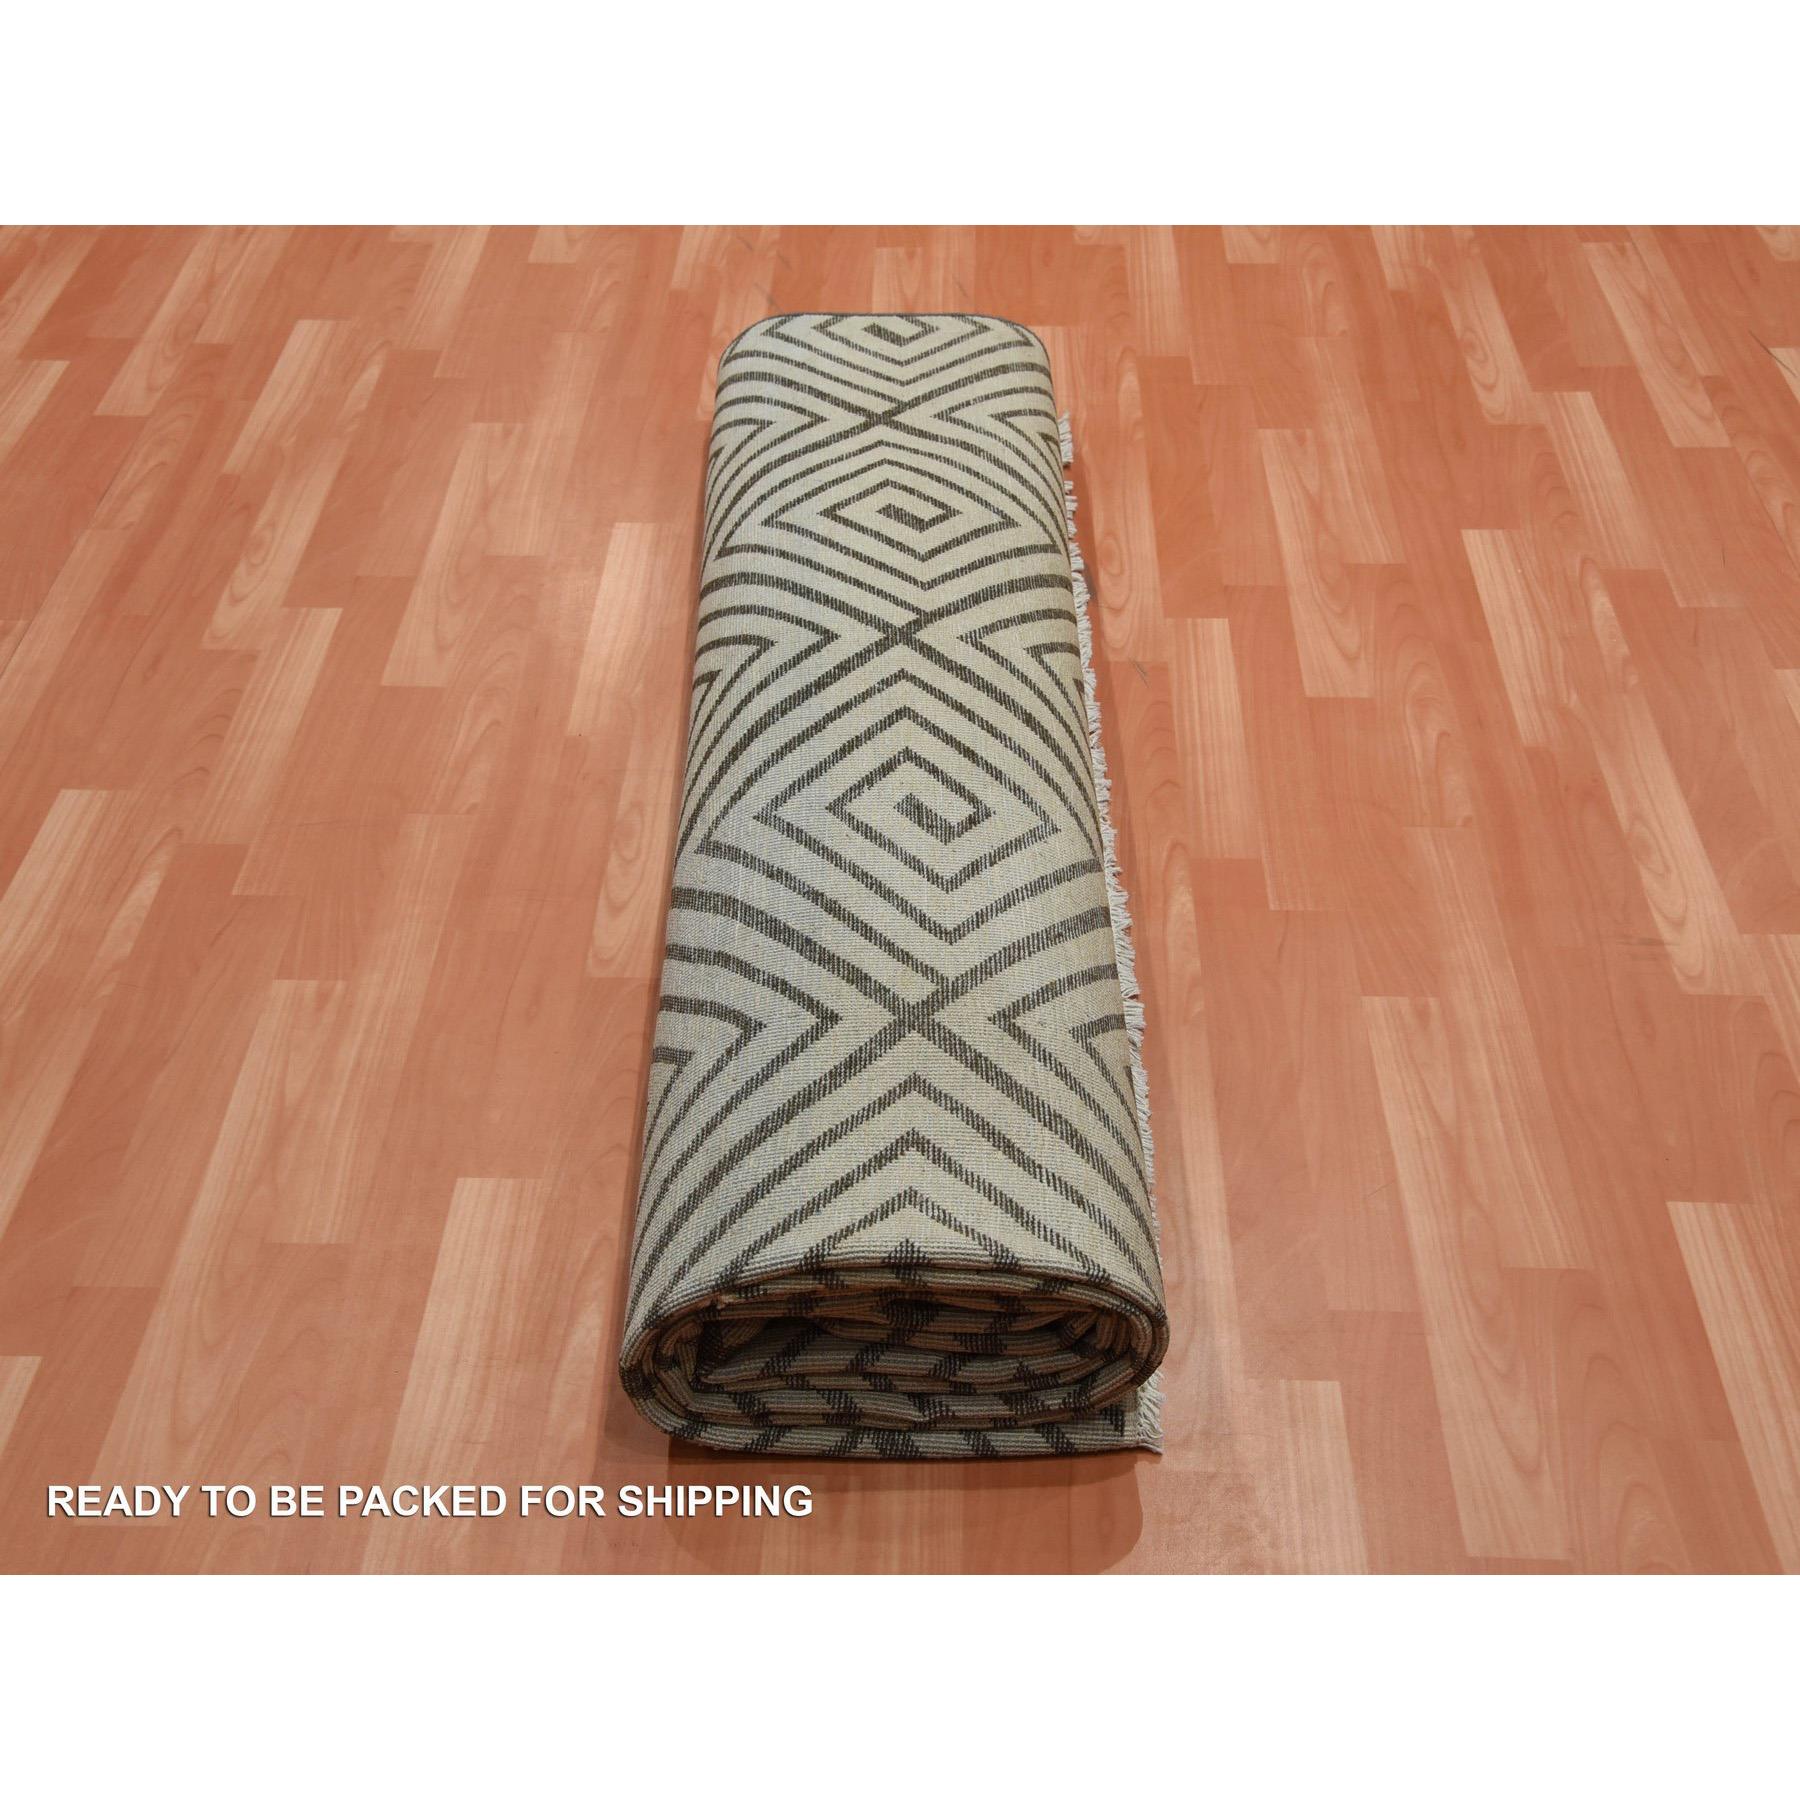 Modern-and-Contemporary-Hand-Knotted-Rug-376100